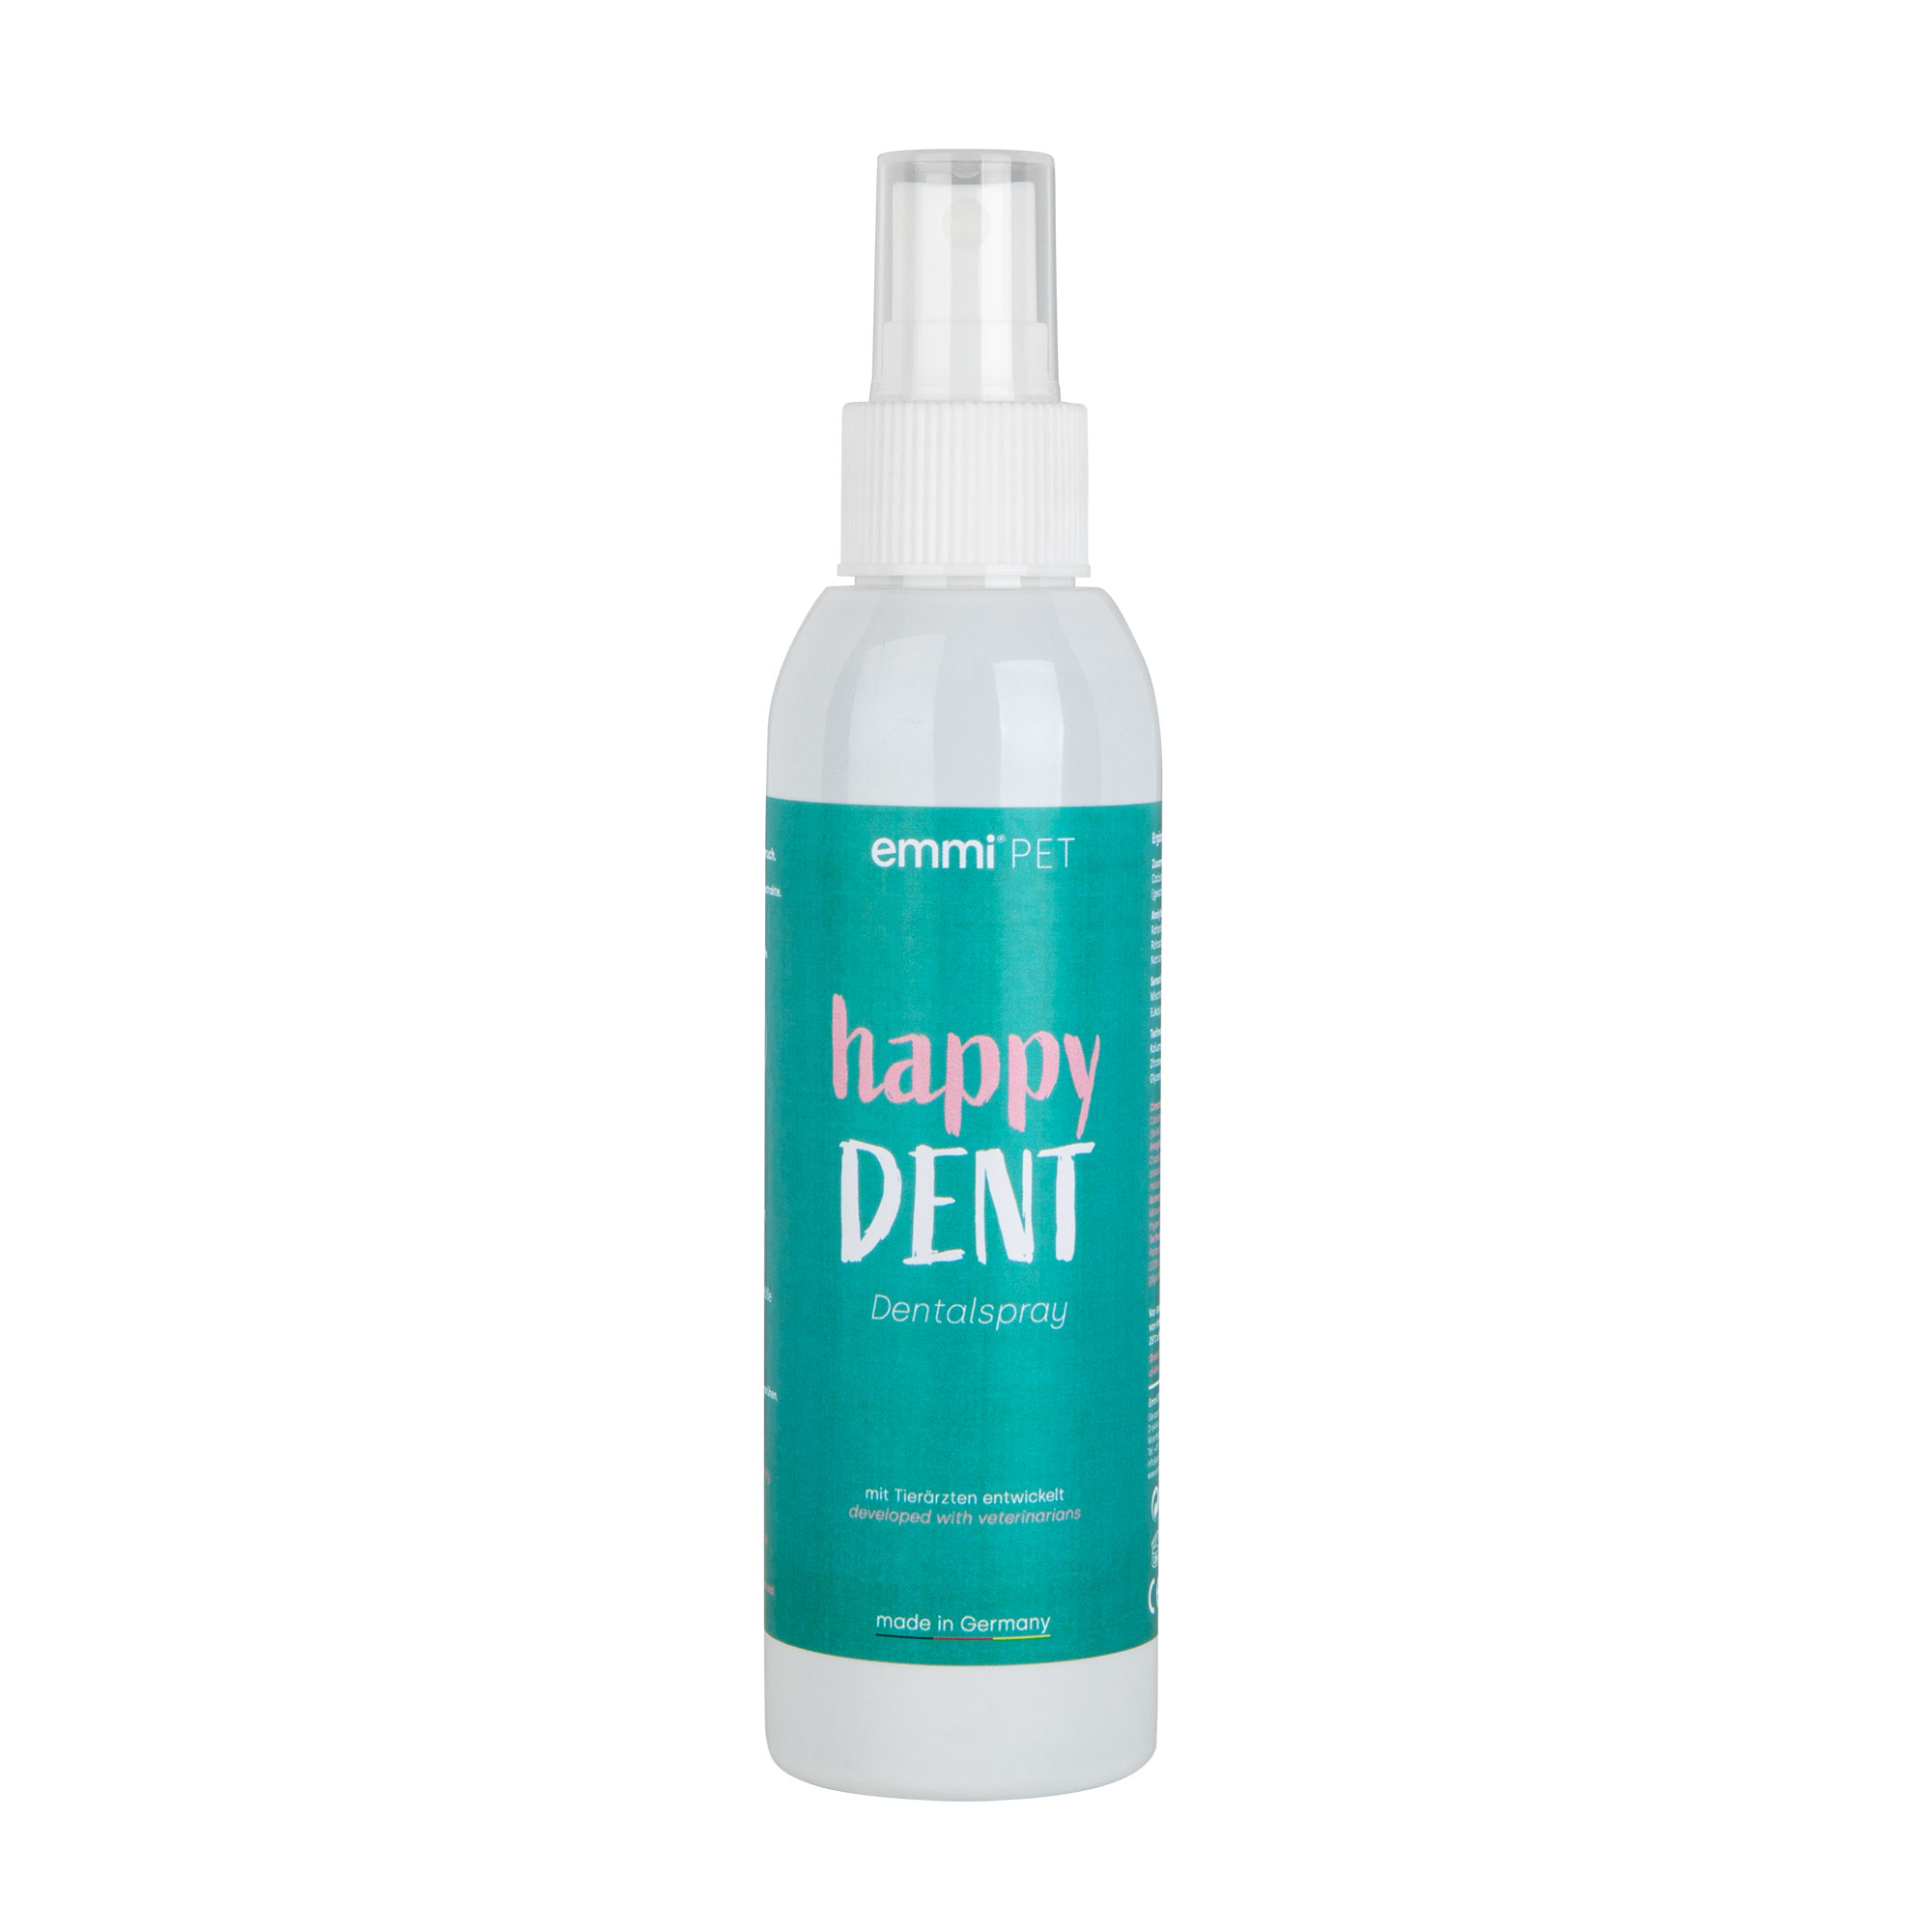 emmi-pet tooth and mouth spray Happy DENT